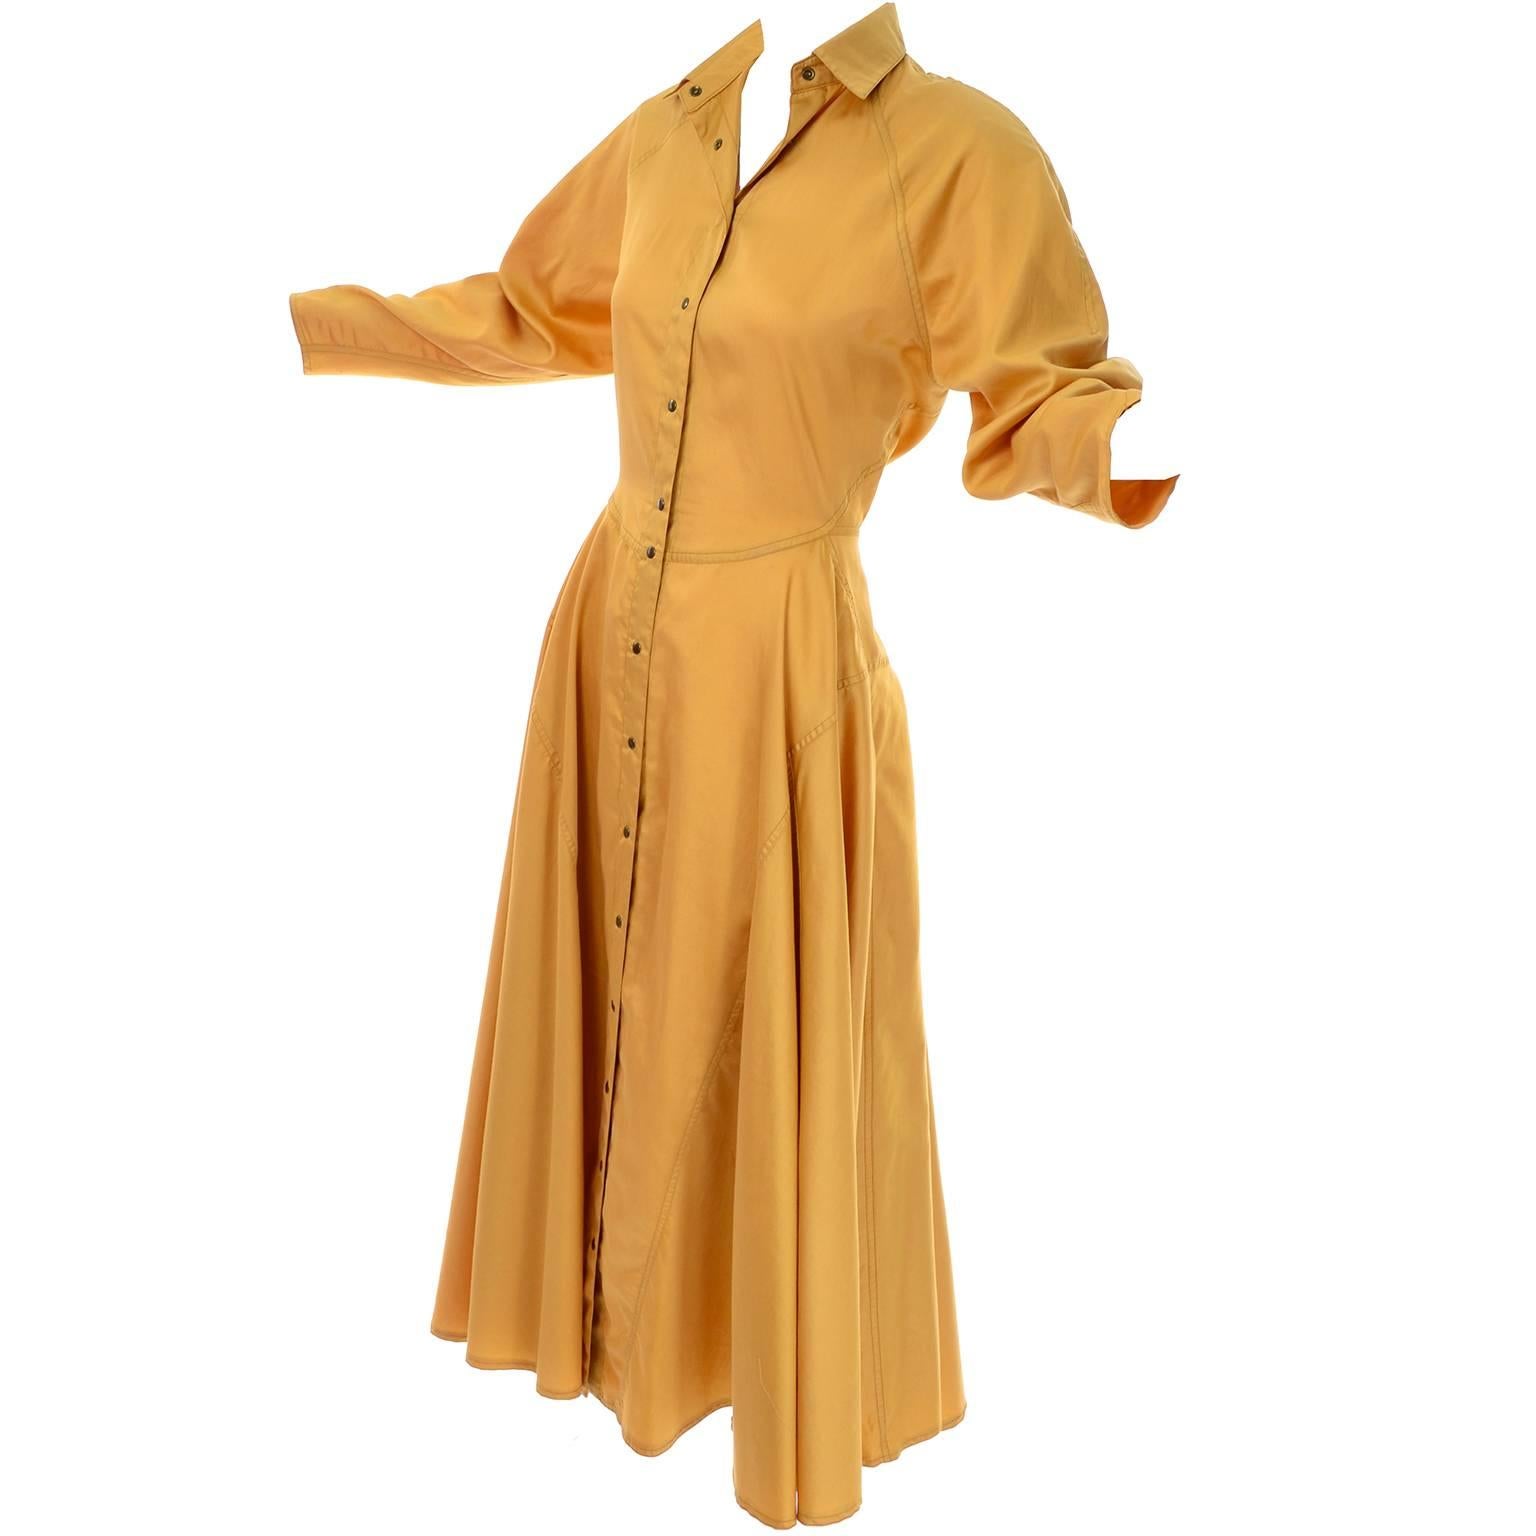 1980s Alaia Vintage Mustard Marigold Dress With a Full Skirt Size 10 French 42